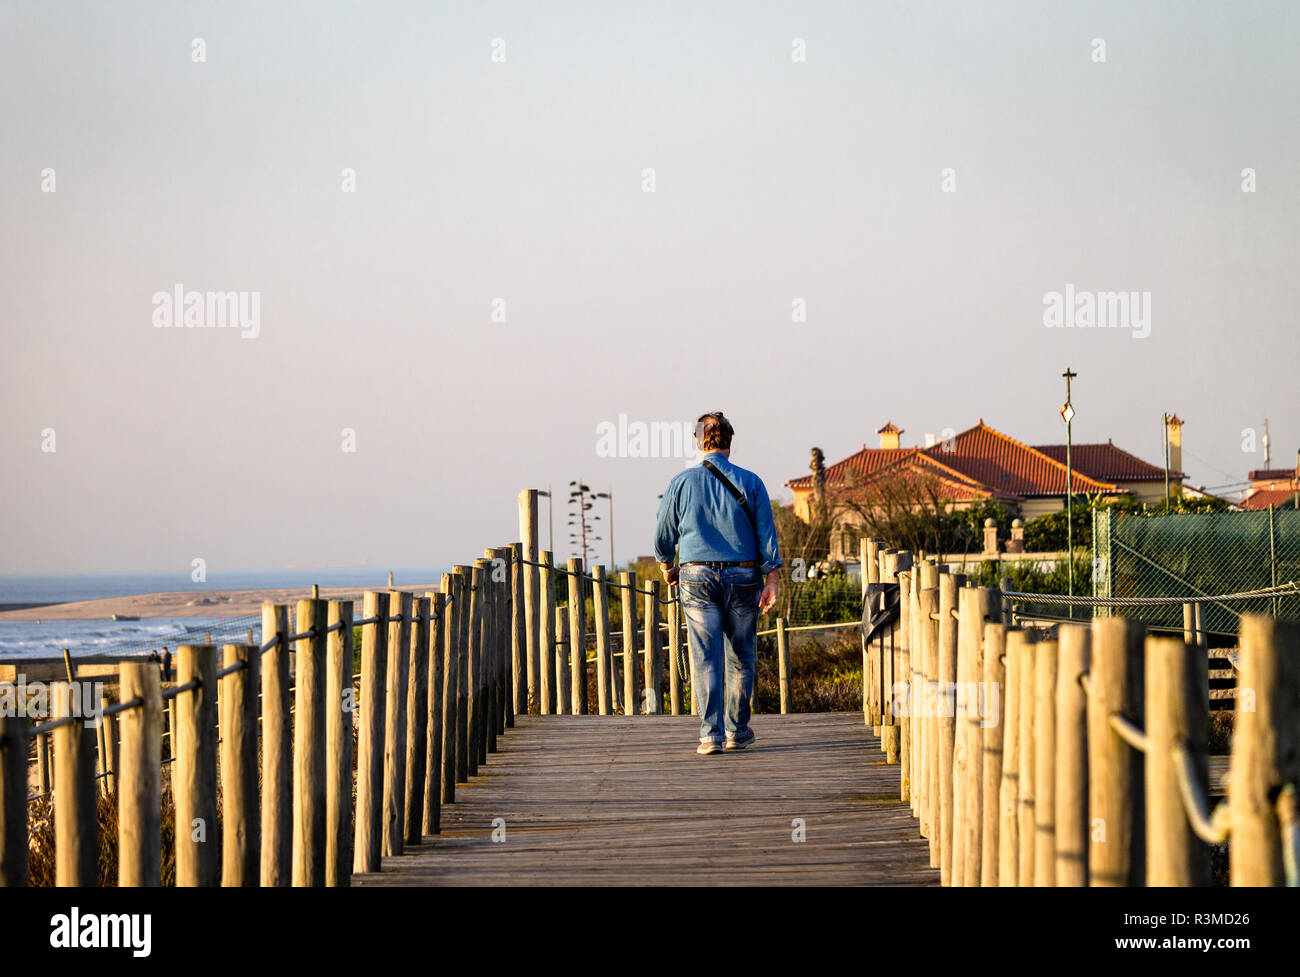 Middle-aged man walks on boardwalk near the ocean. Blue shirt, jeans. Rear view. Distant houses. Copy Space. Warm light. Stock Photo